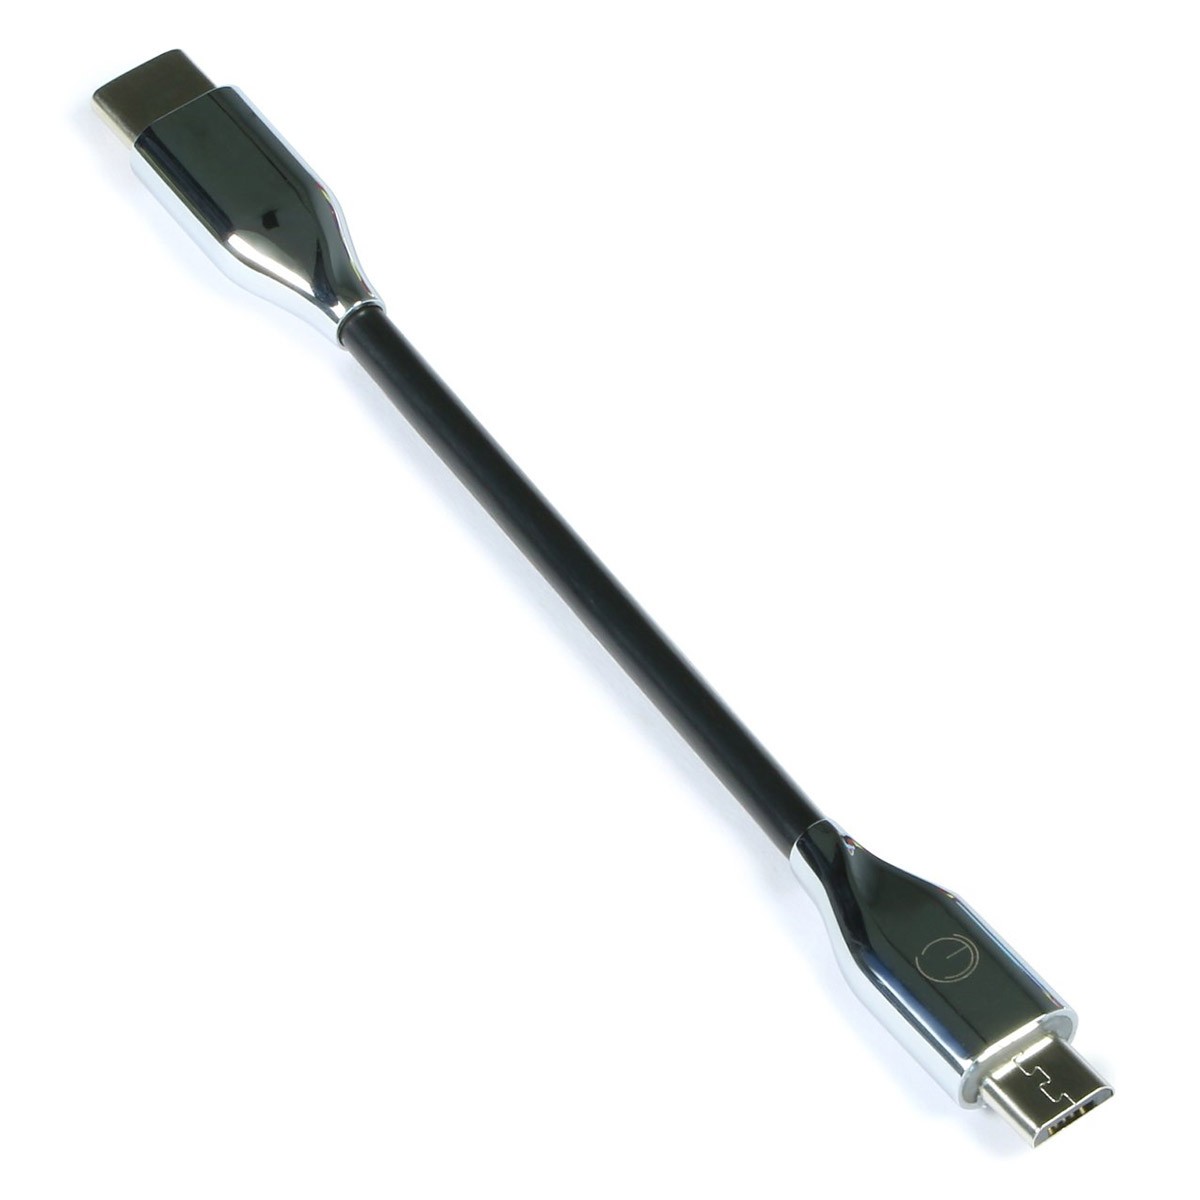 OEAUDIO OEOTG USB-C to Micro USB OTG USB Cable 12cm